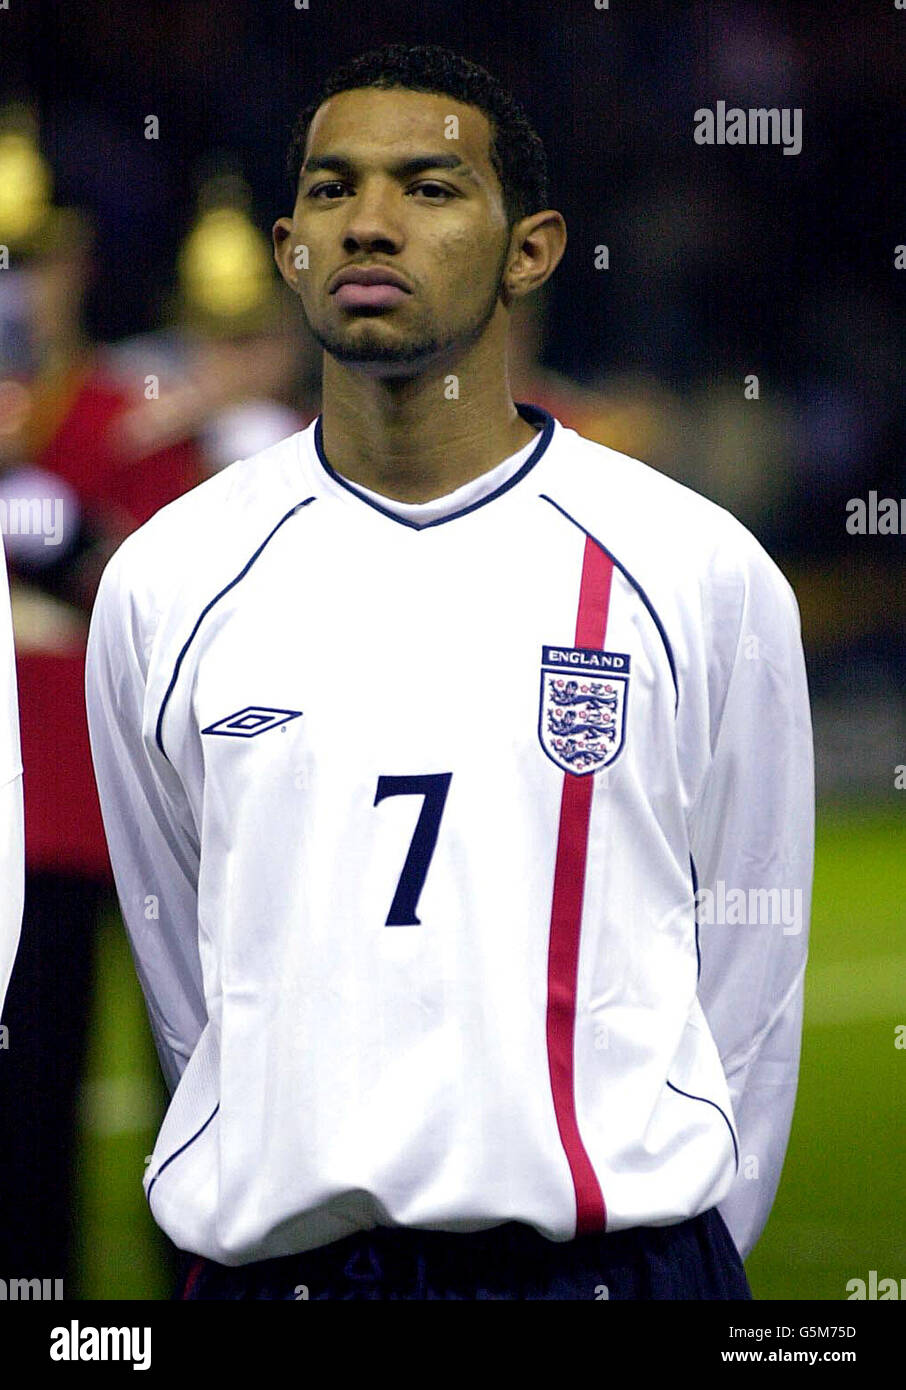 England's Under 21 Jermaine Pennant during the play-off, second leg of the UEFA U21 Championship Qualifier, between England v Holland at Pride Park, Derby.. Photo Rui Vieira.. Stock Photo